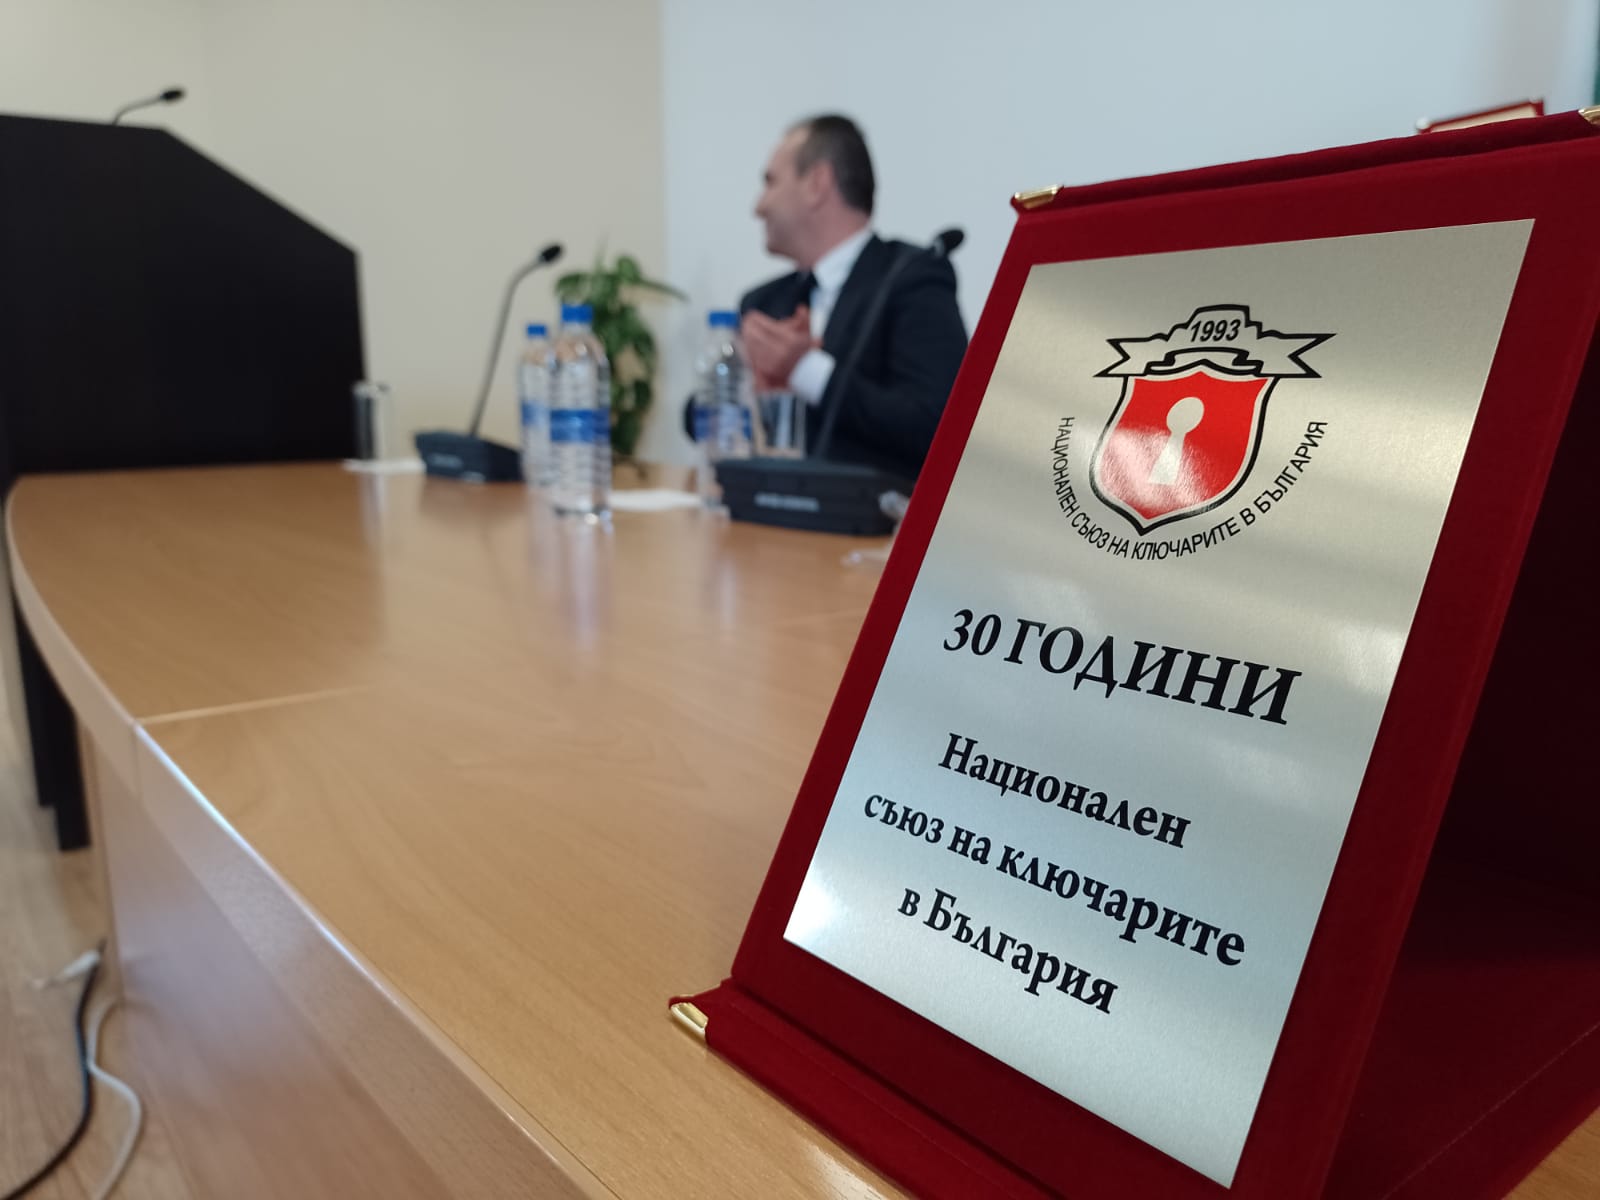 The National Union of Locksmiths in Bulgaria awarded employees of the Ministry of the Interior